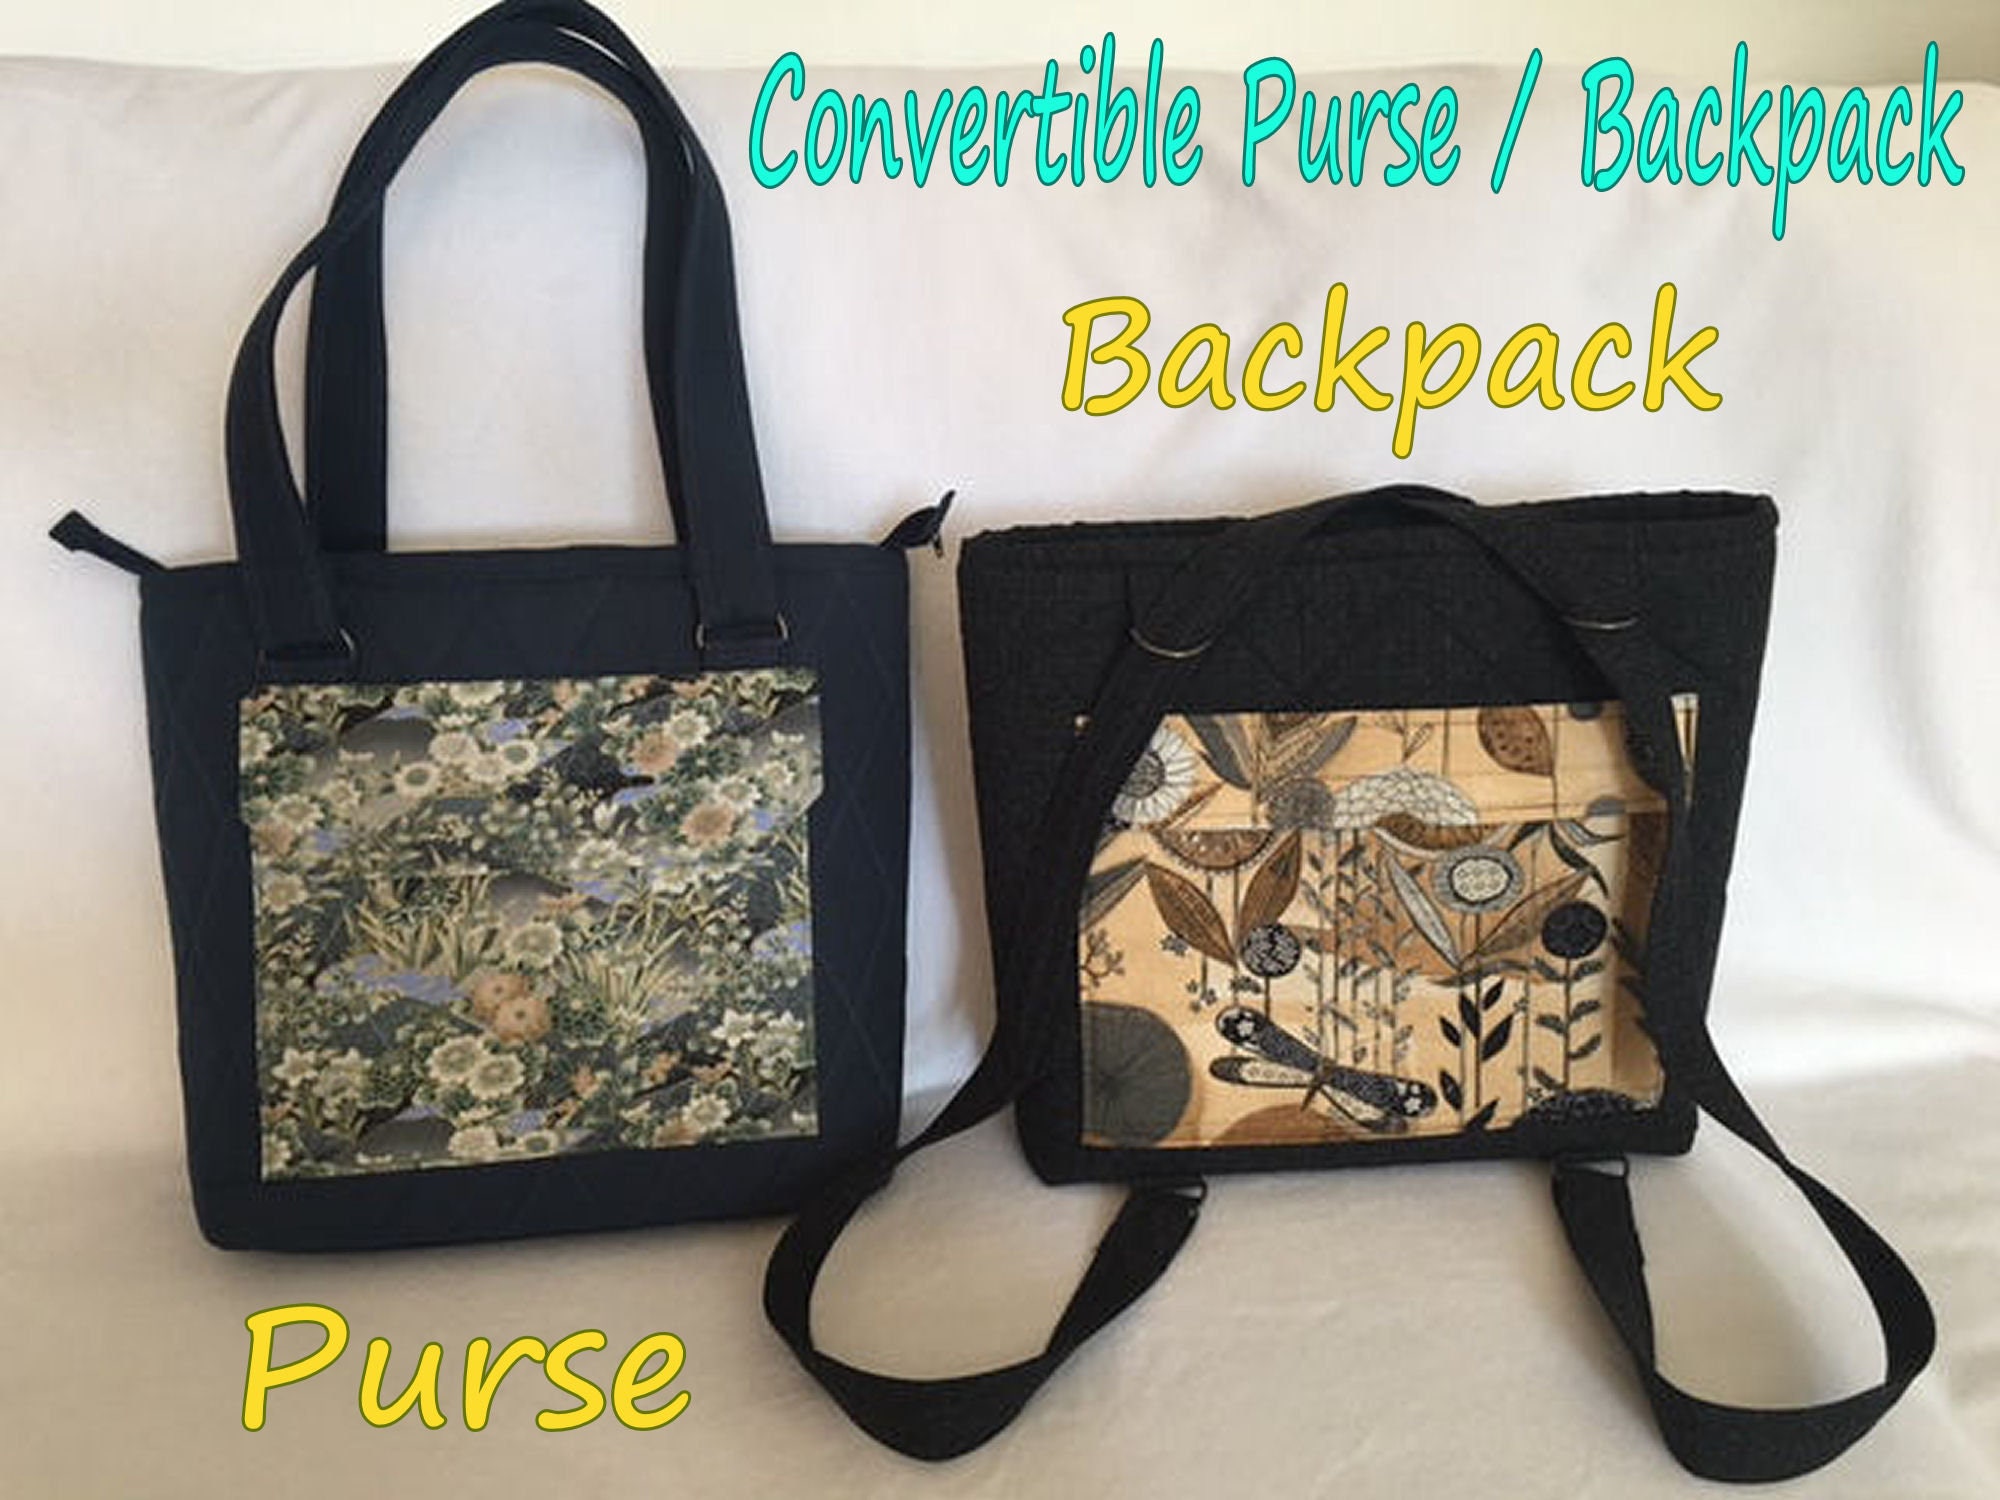 Troy Convertible Tote Backpack PDF Sewing Pattern Convertible 